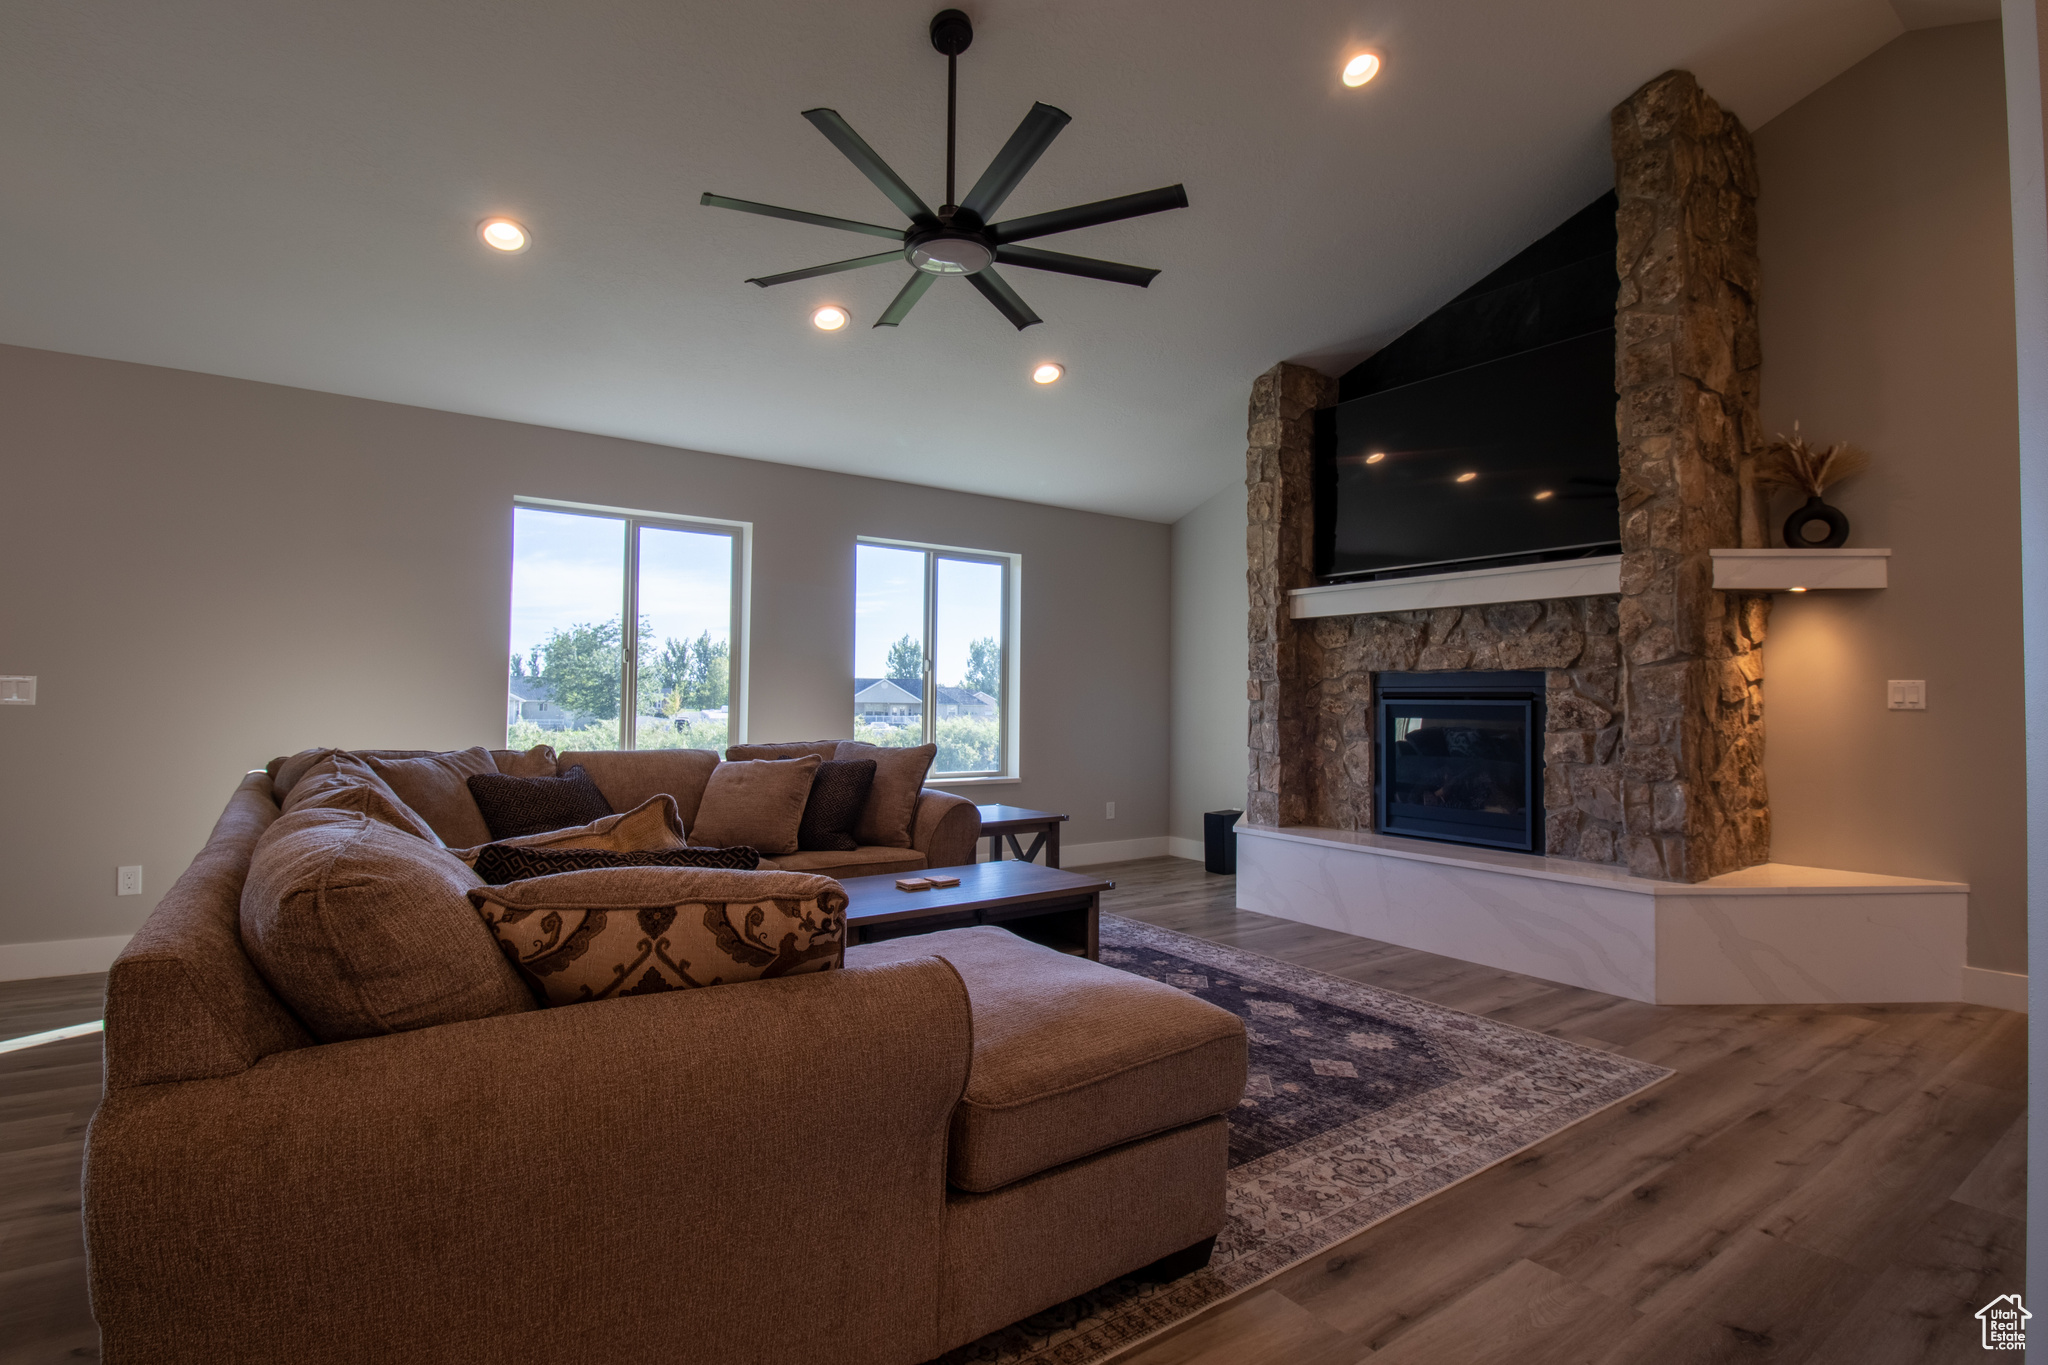 Living room with a fireplace, dark hardwood / wood-style flooring, high vaulted ceiling, and ceiling fan